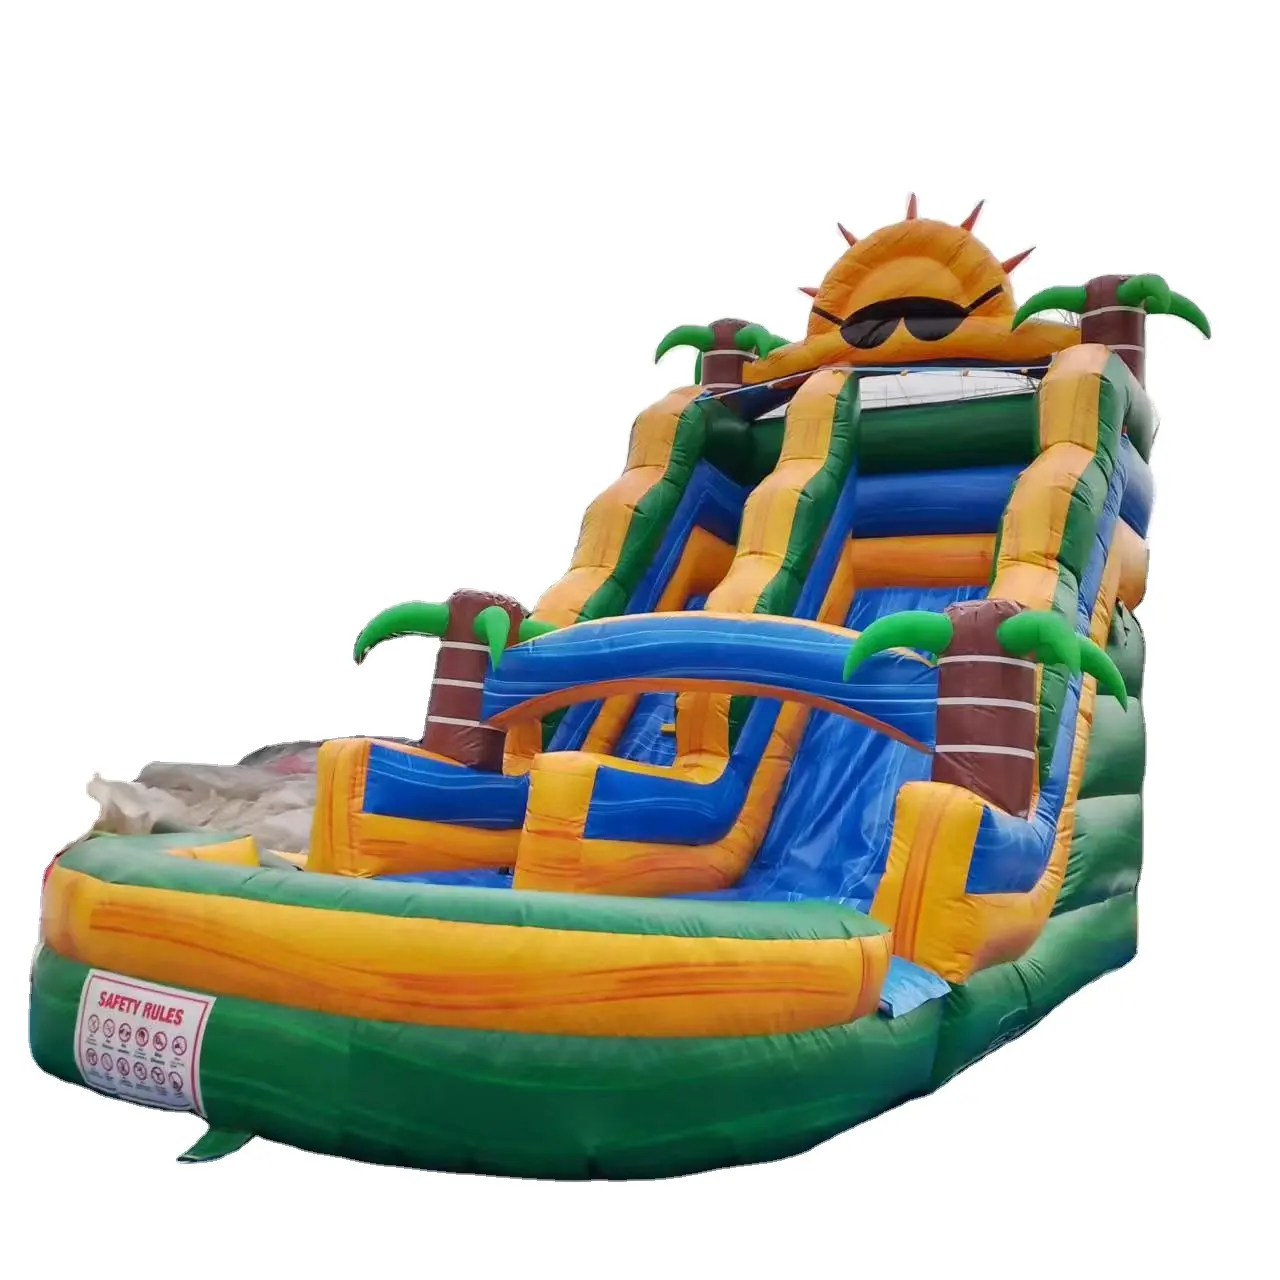 Wholesale factory price custom jumping castle inflatable bouncer castle water slide with pool for kids fun in outdoor playground